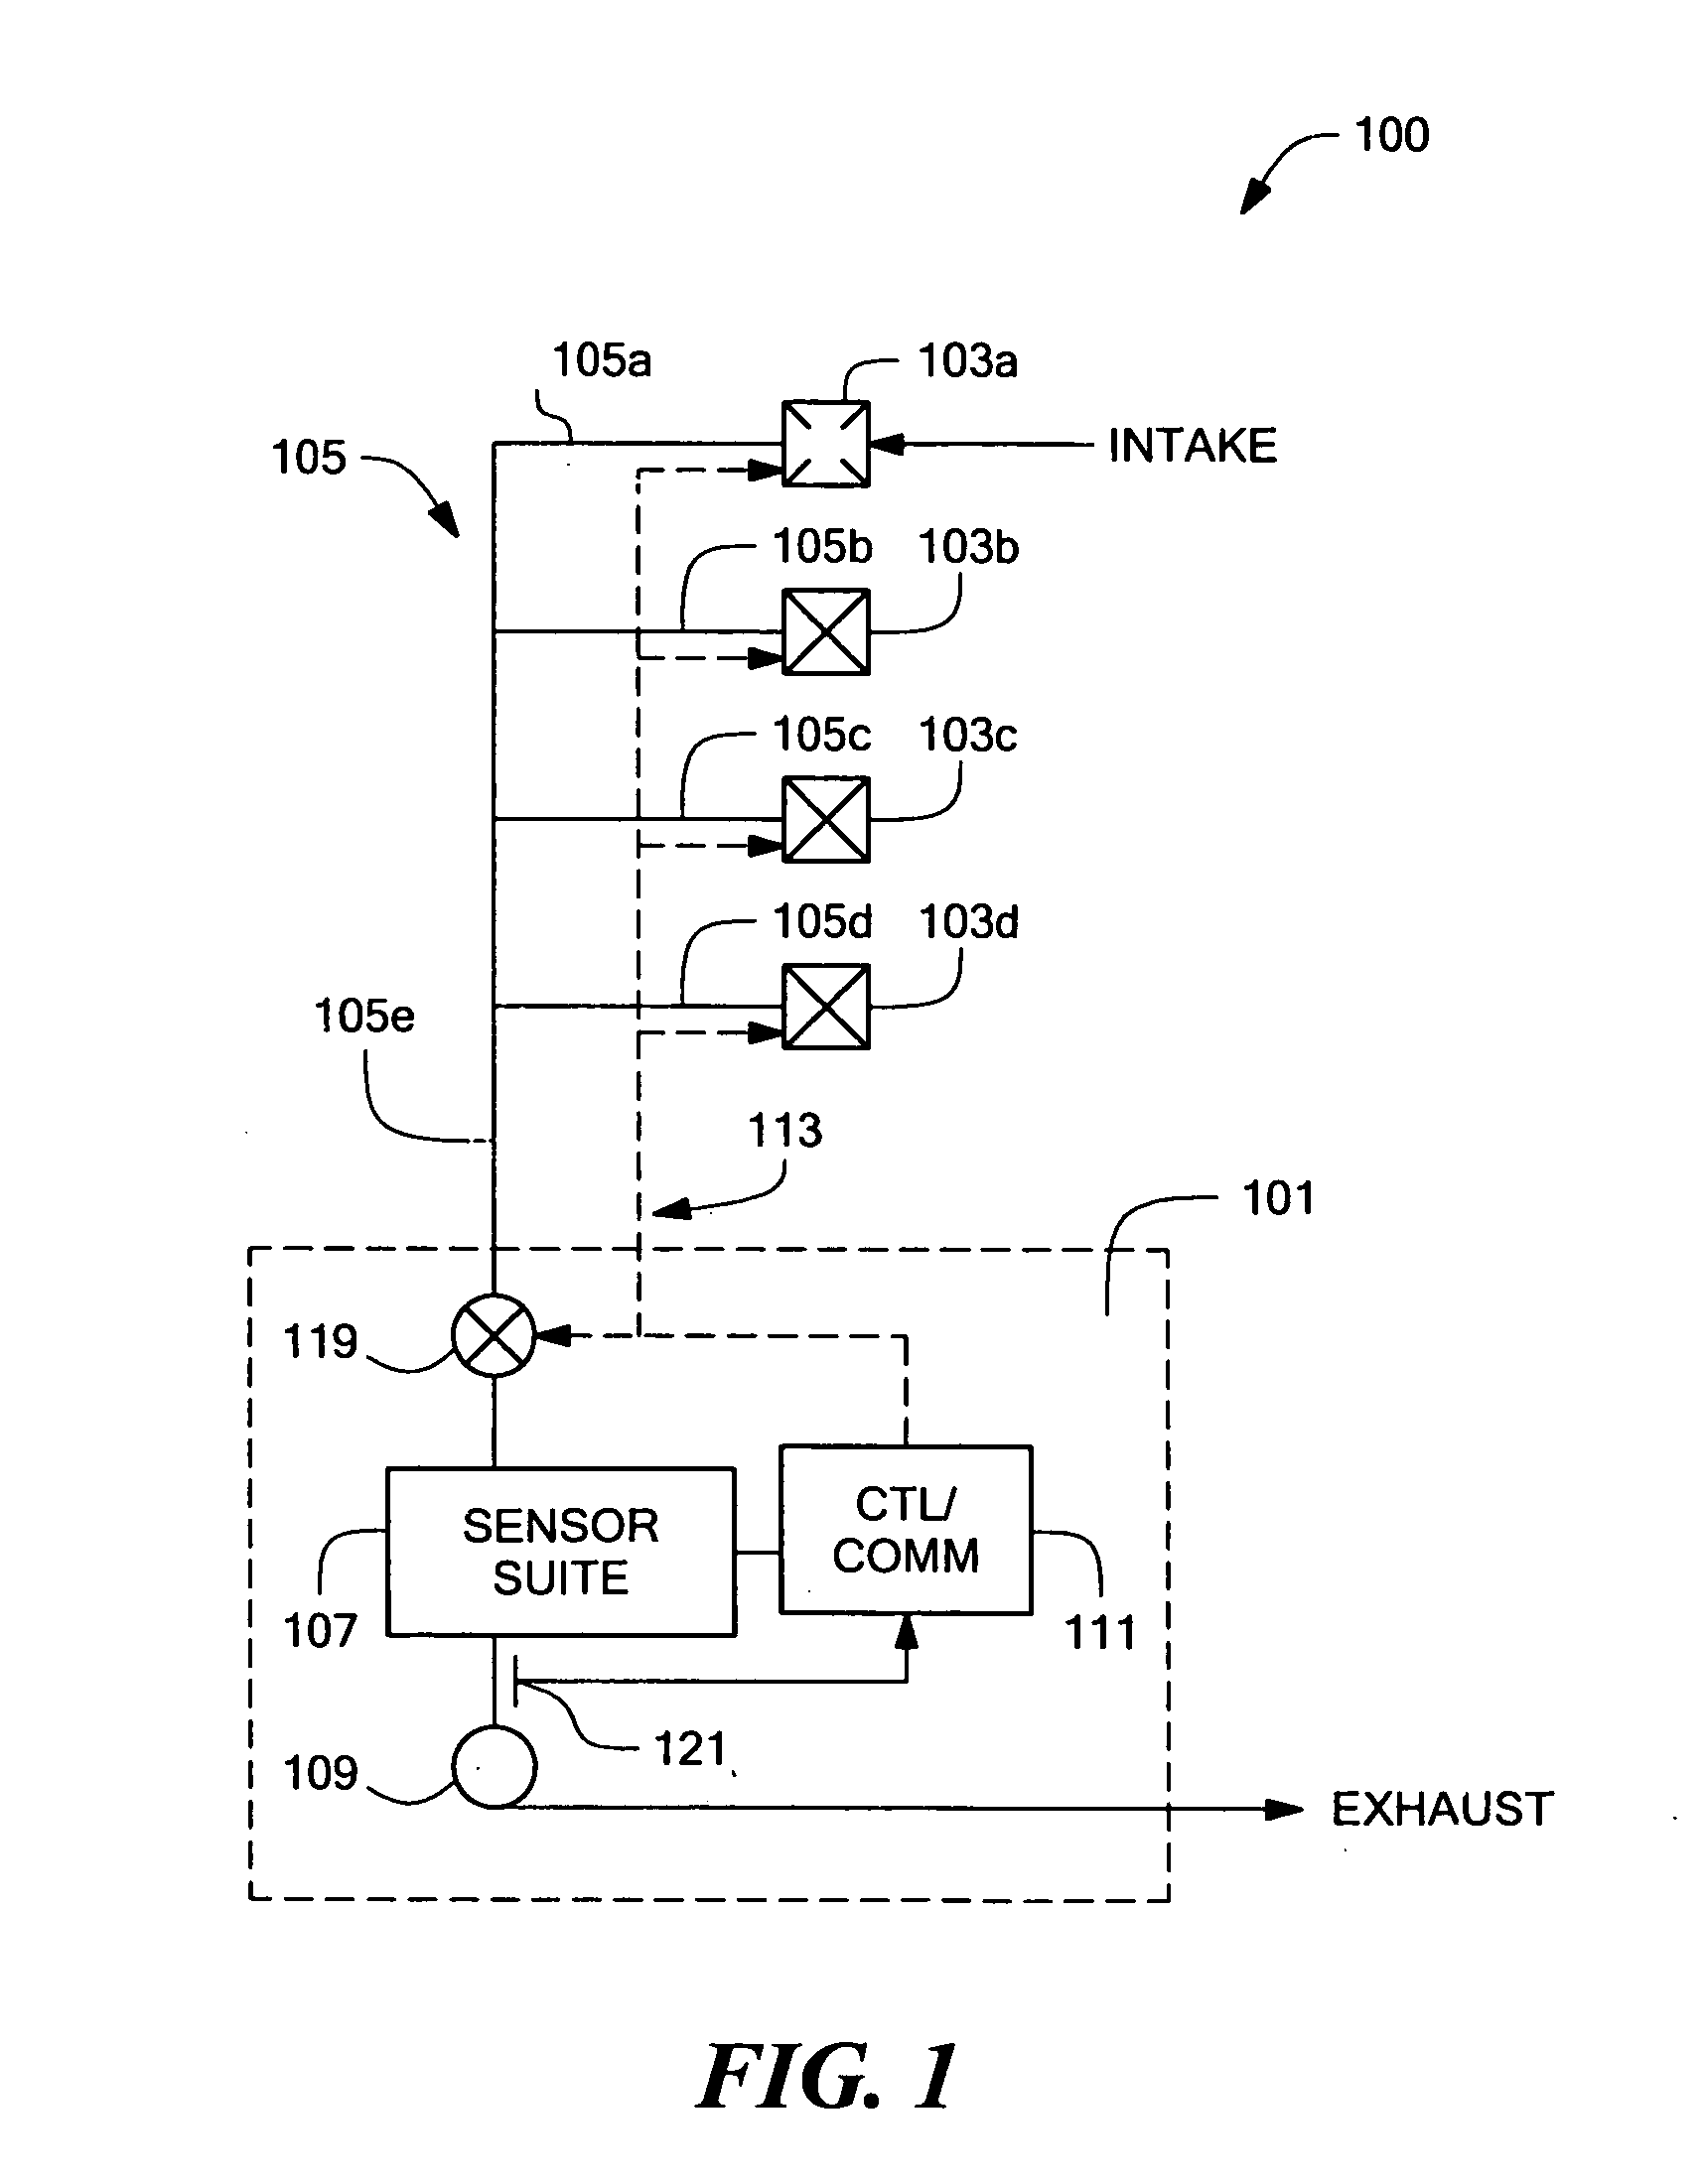 Air monitoring system having tubing with an electrically conductive inner surface for transporting air samples